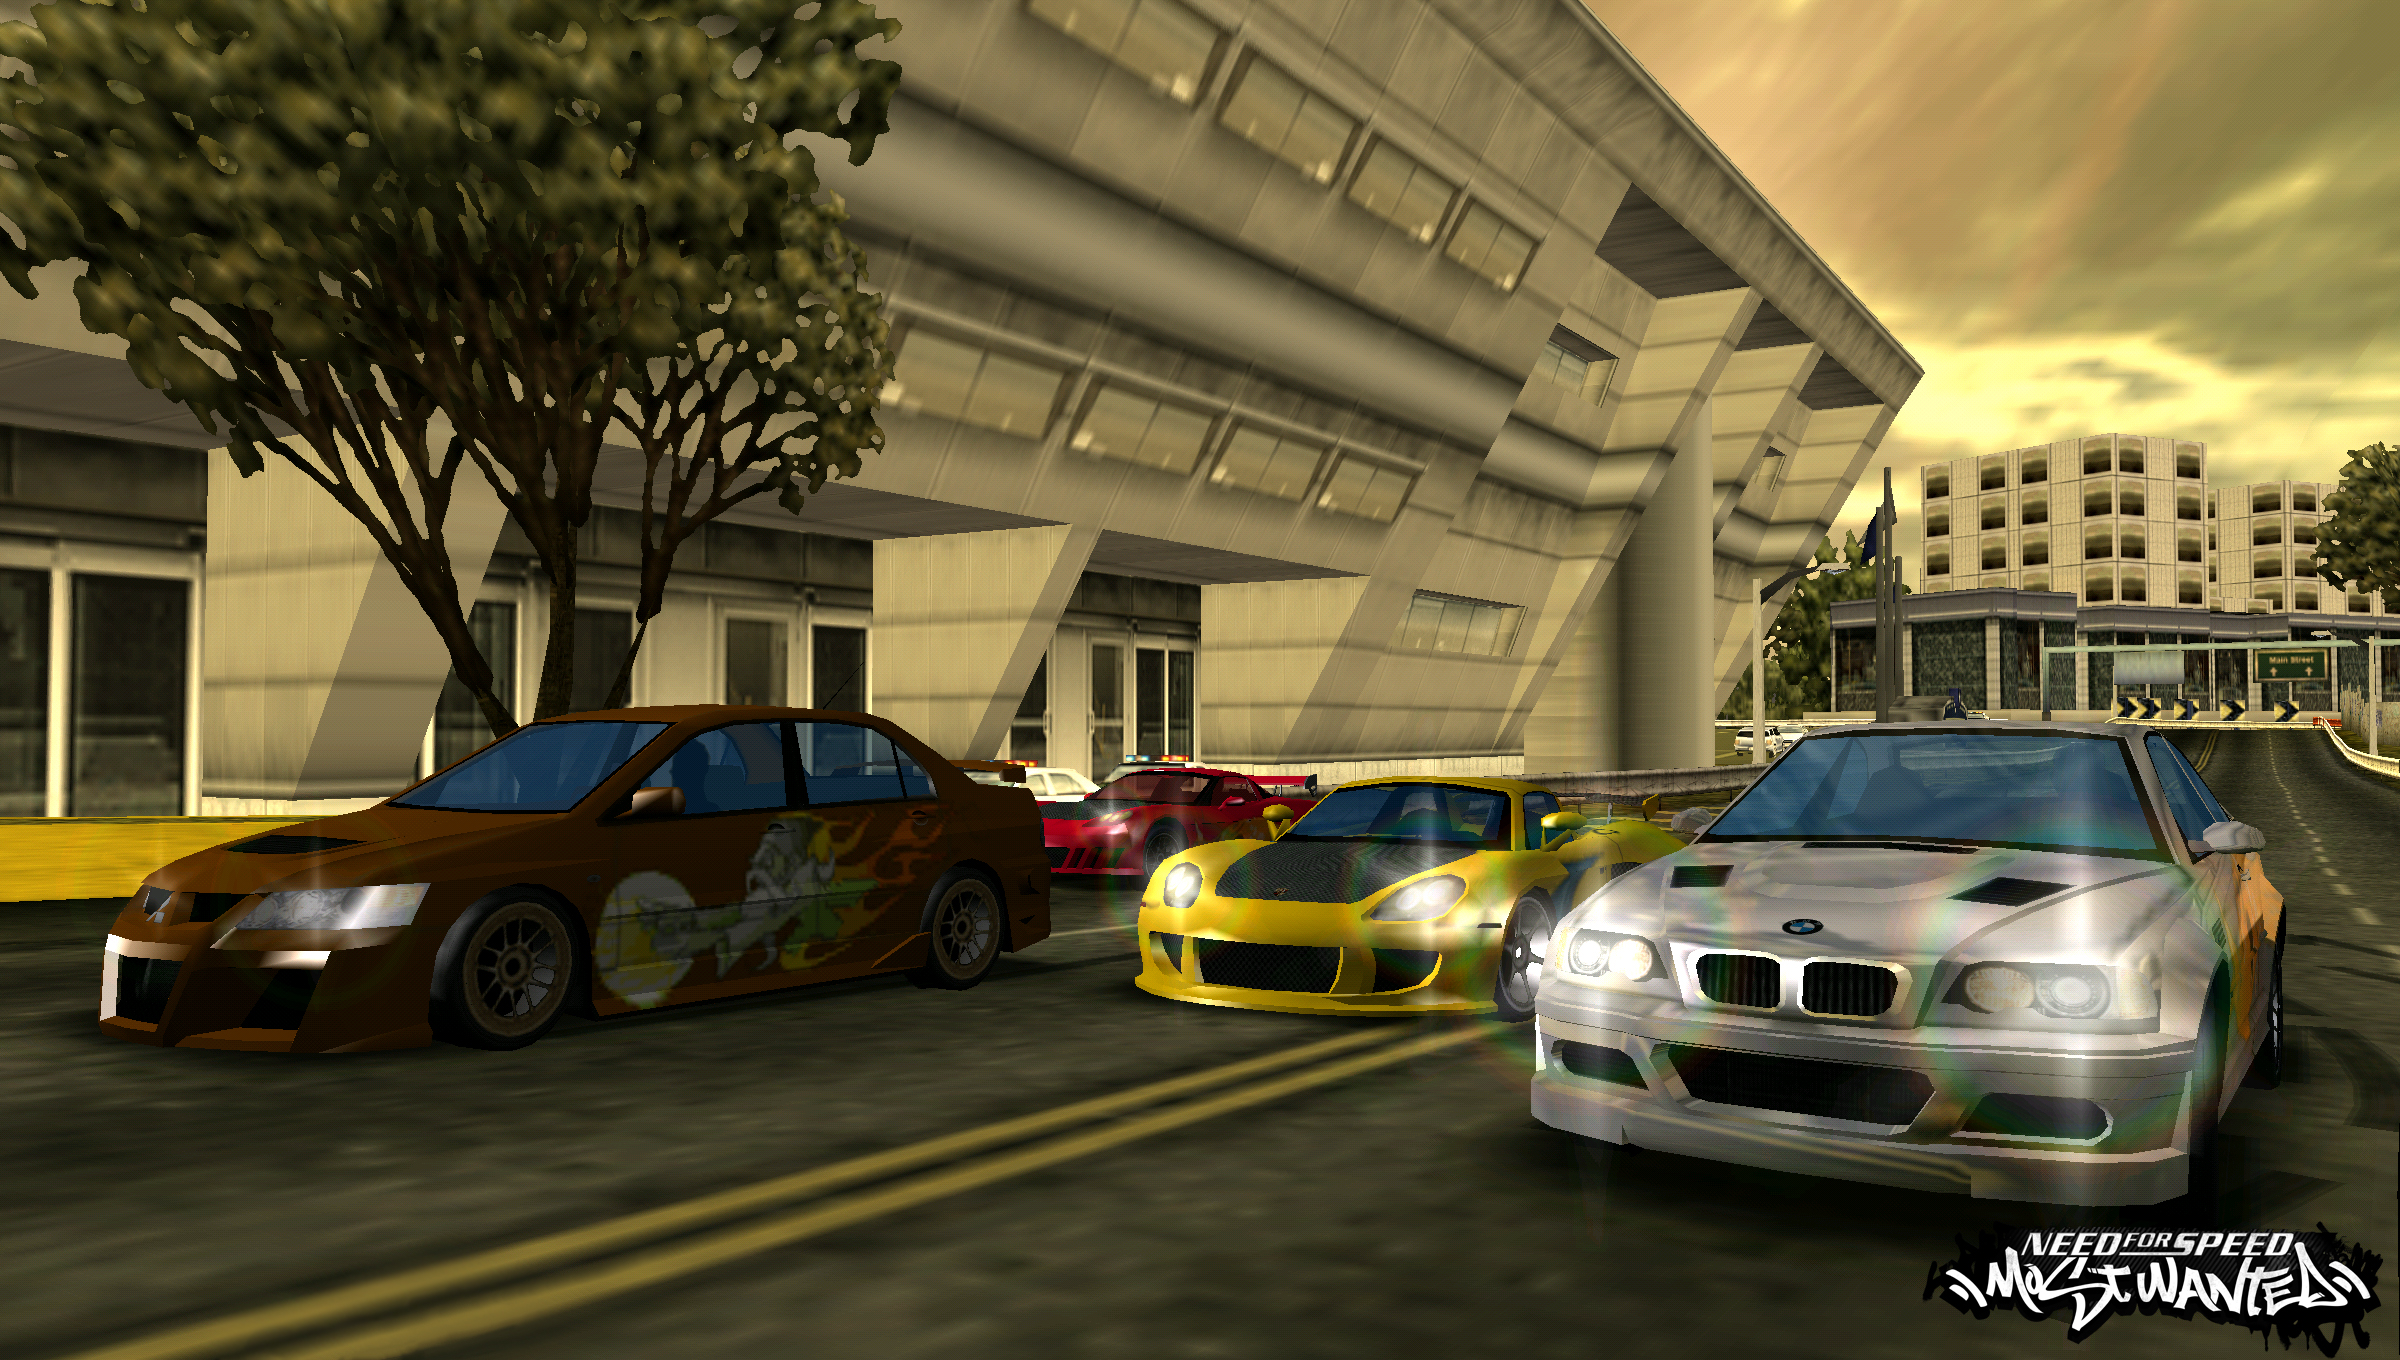 Download Nfs undergroung Ppsspp Highly Cimpressed